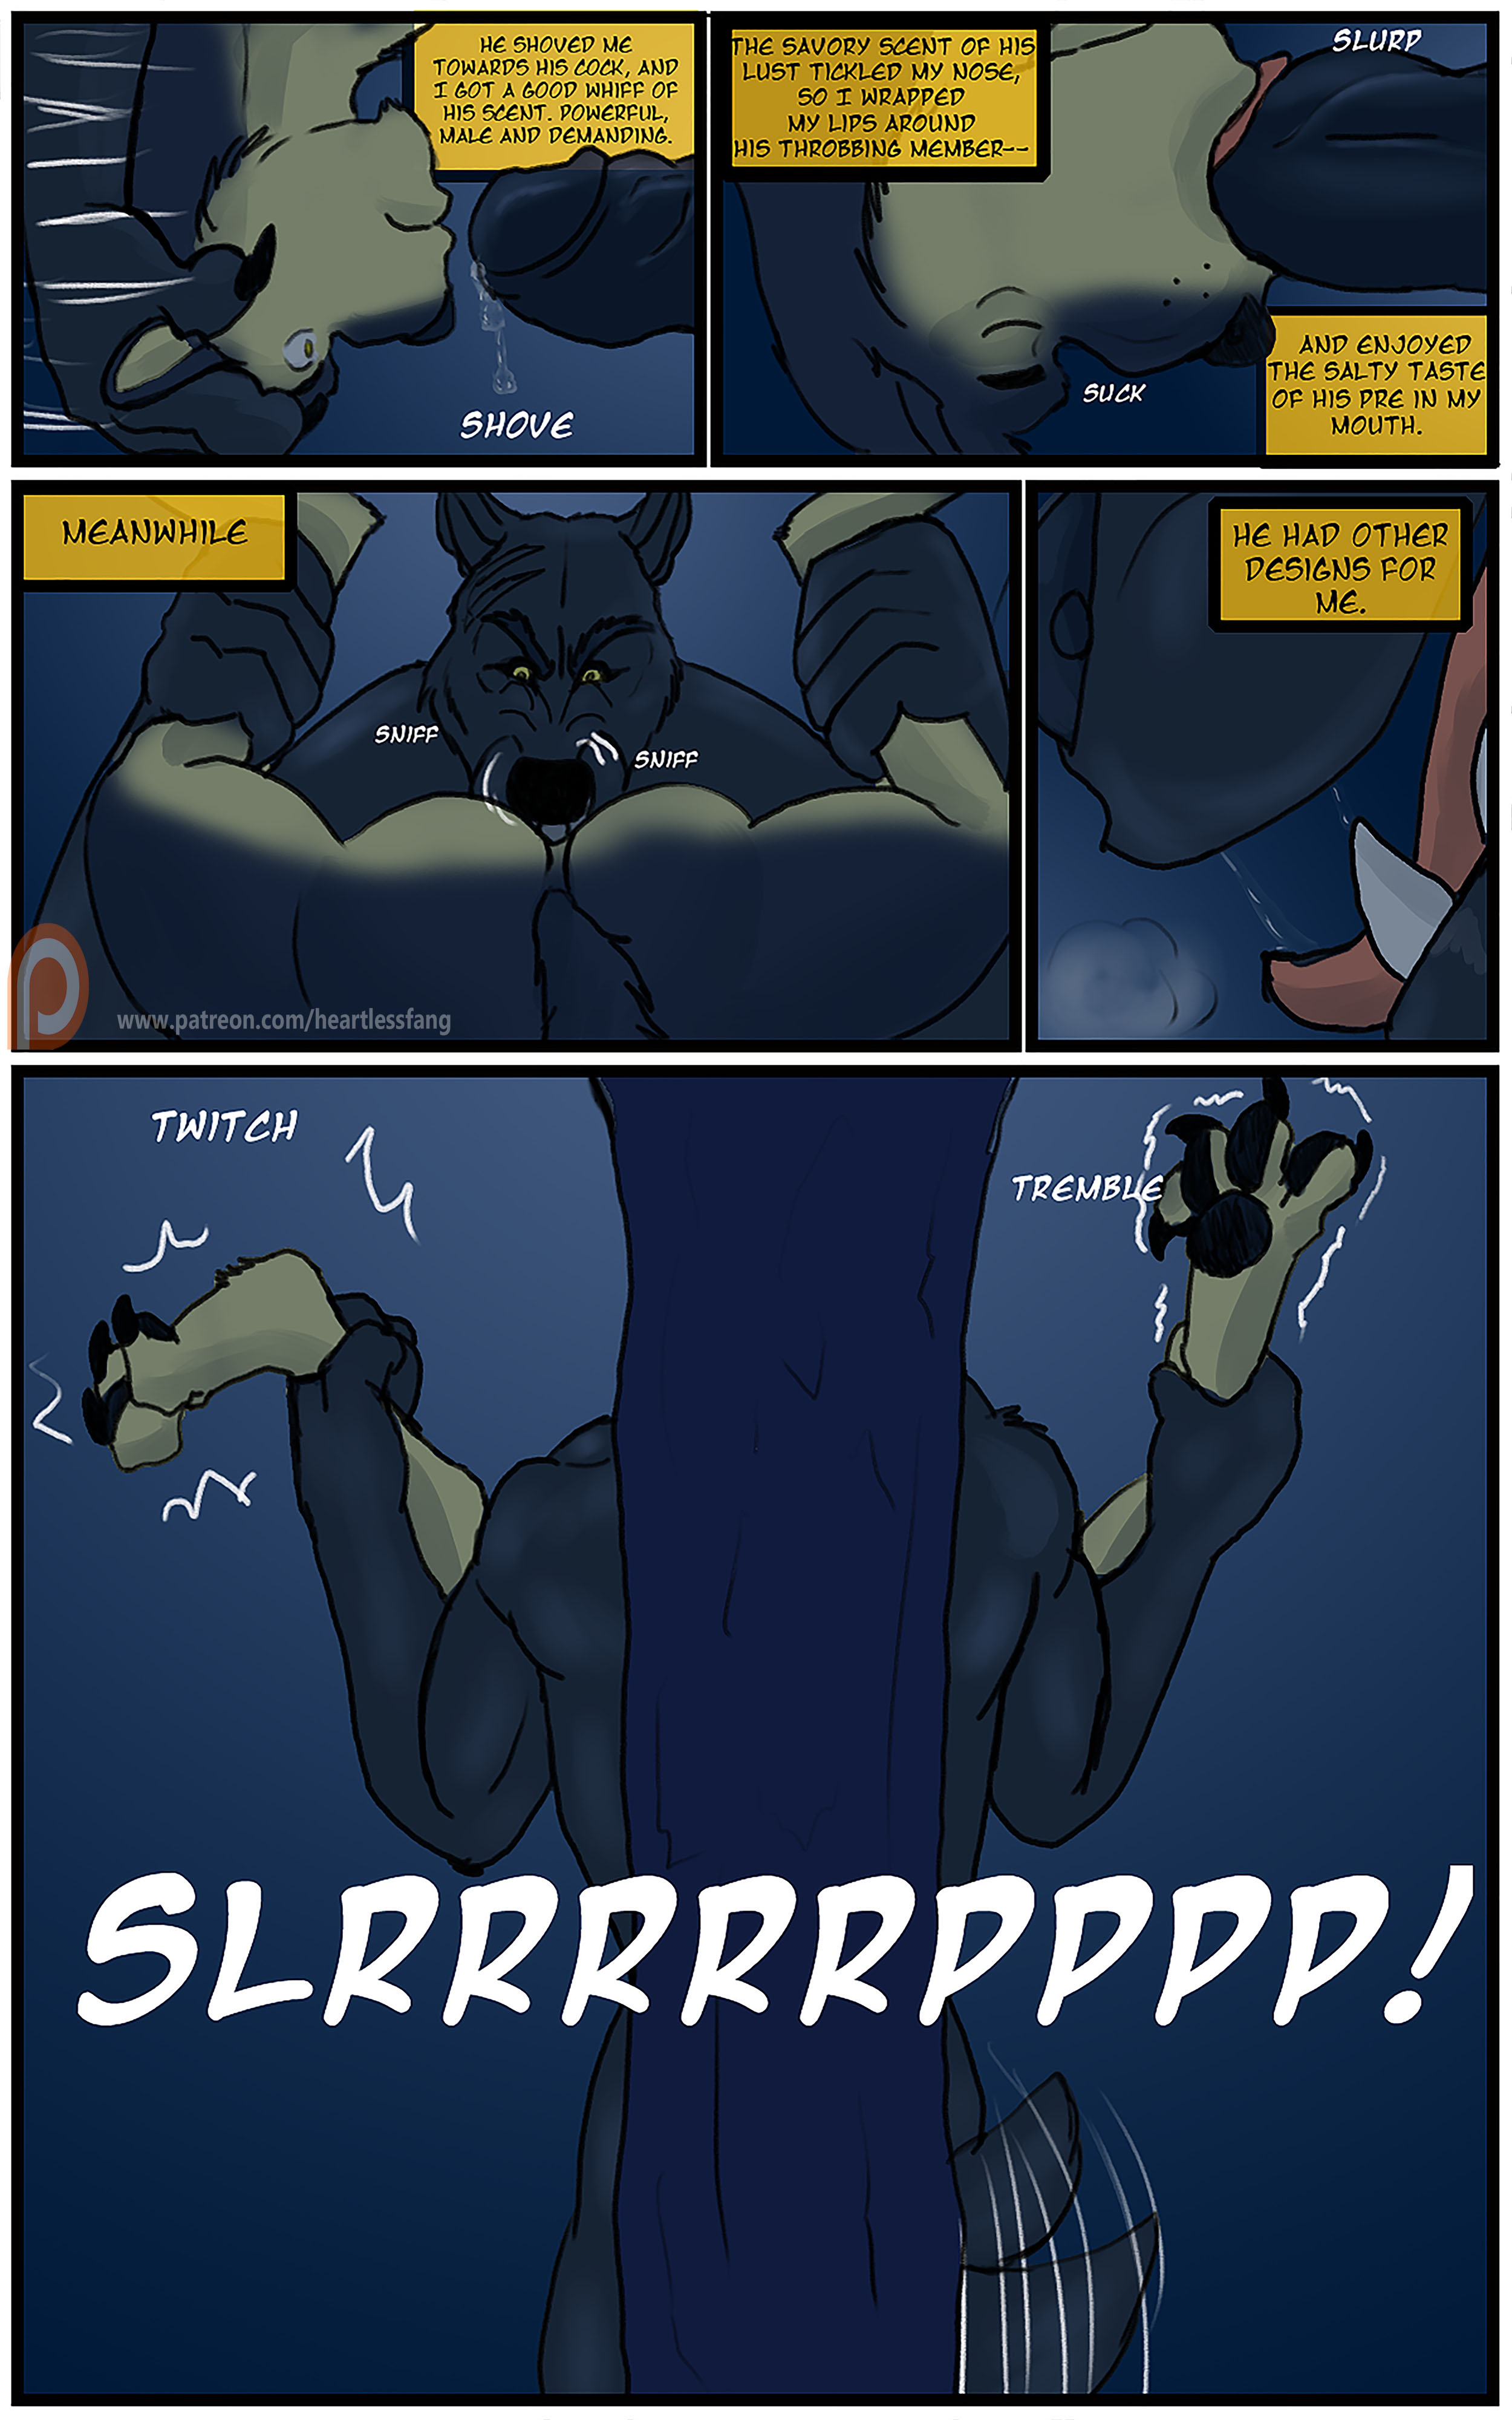 Furry porn gay comic dominated